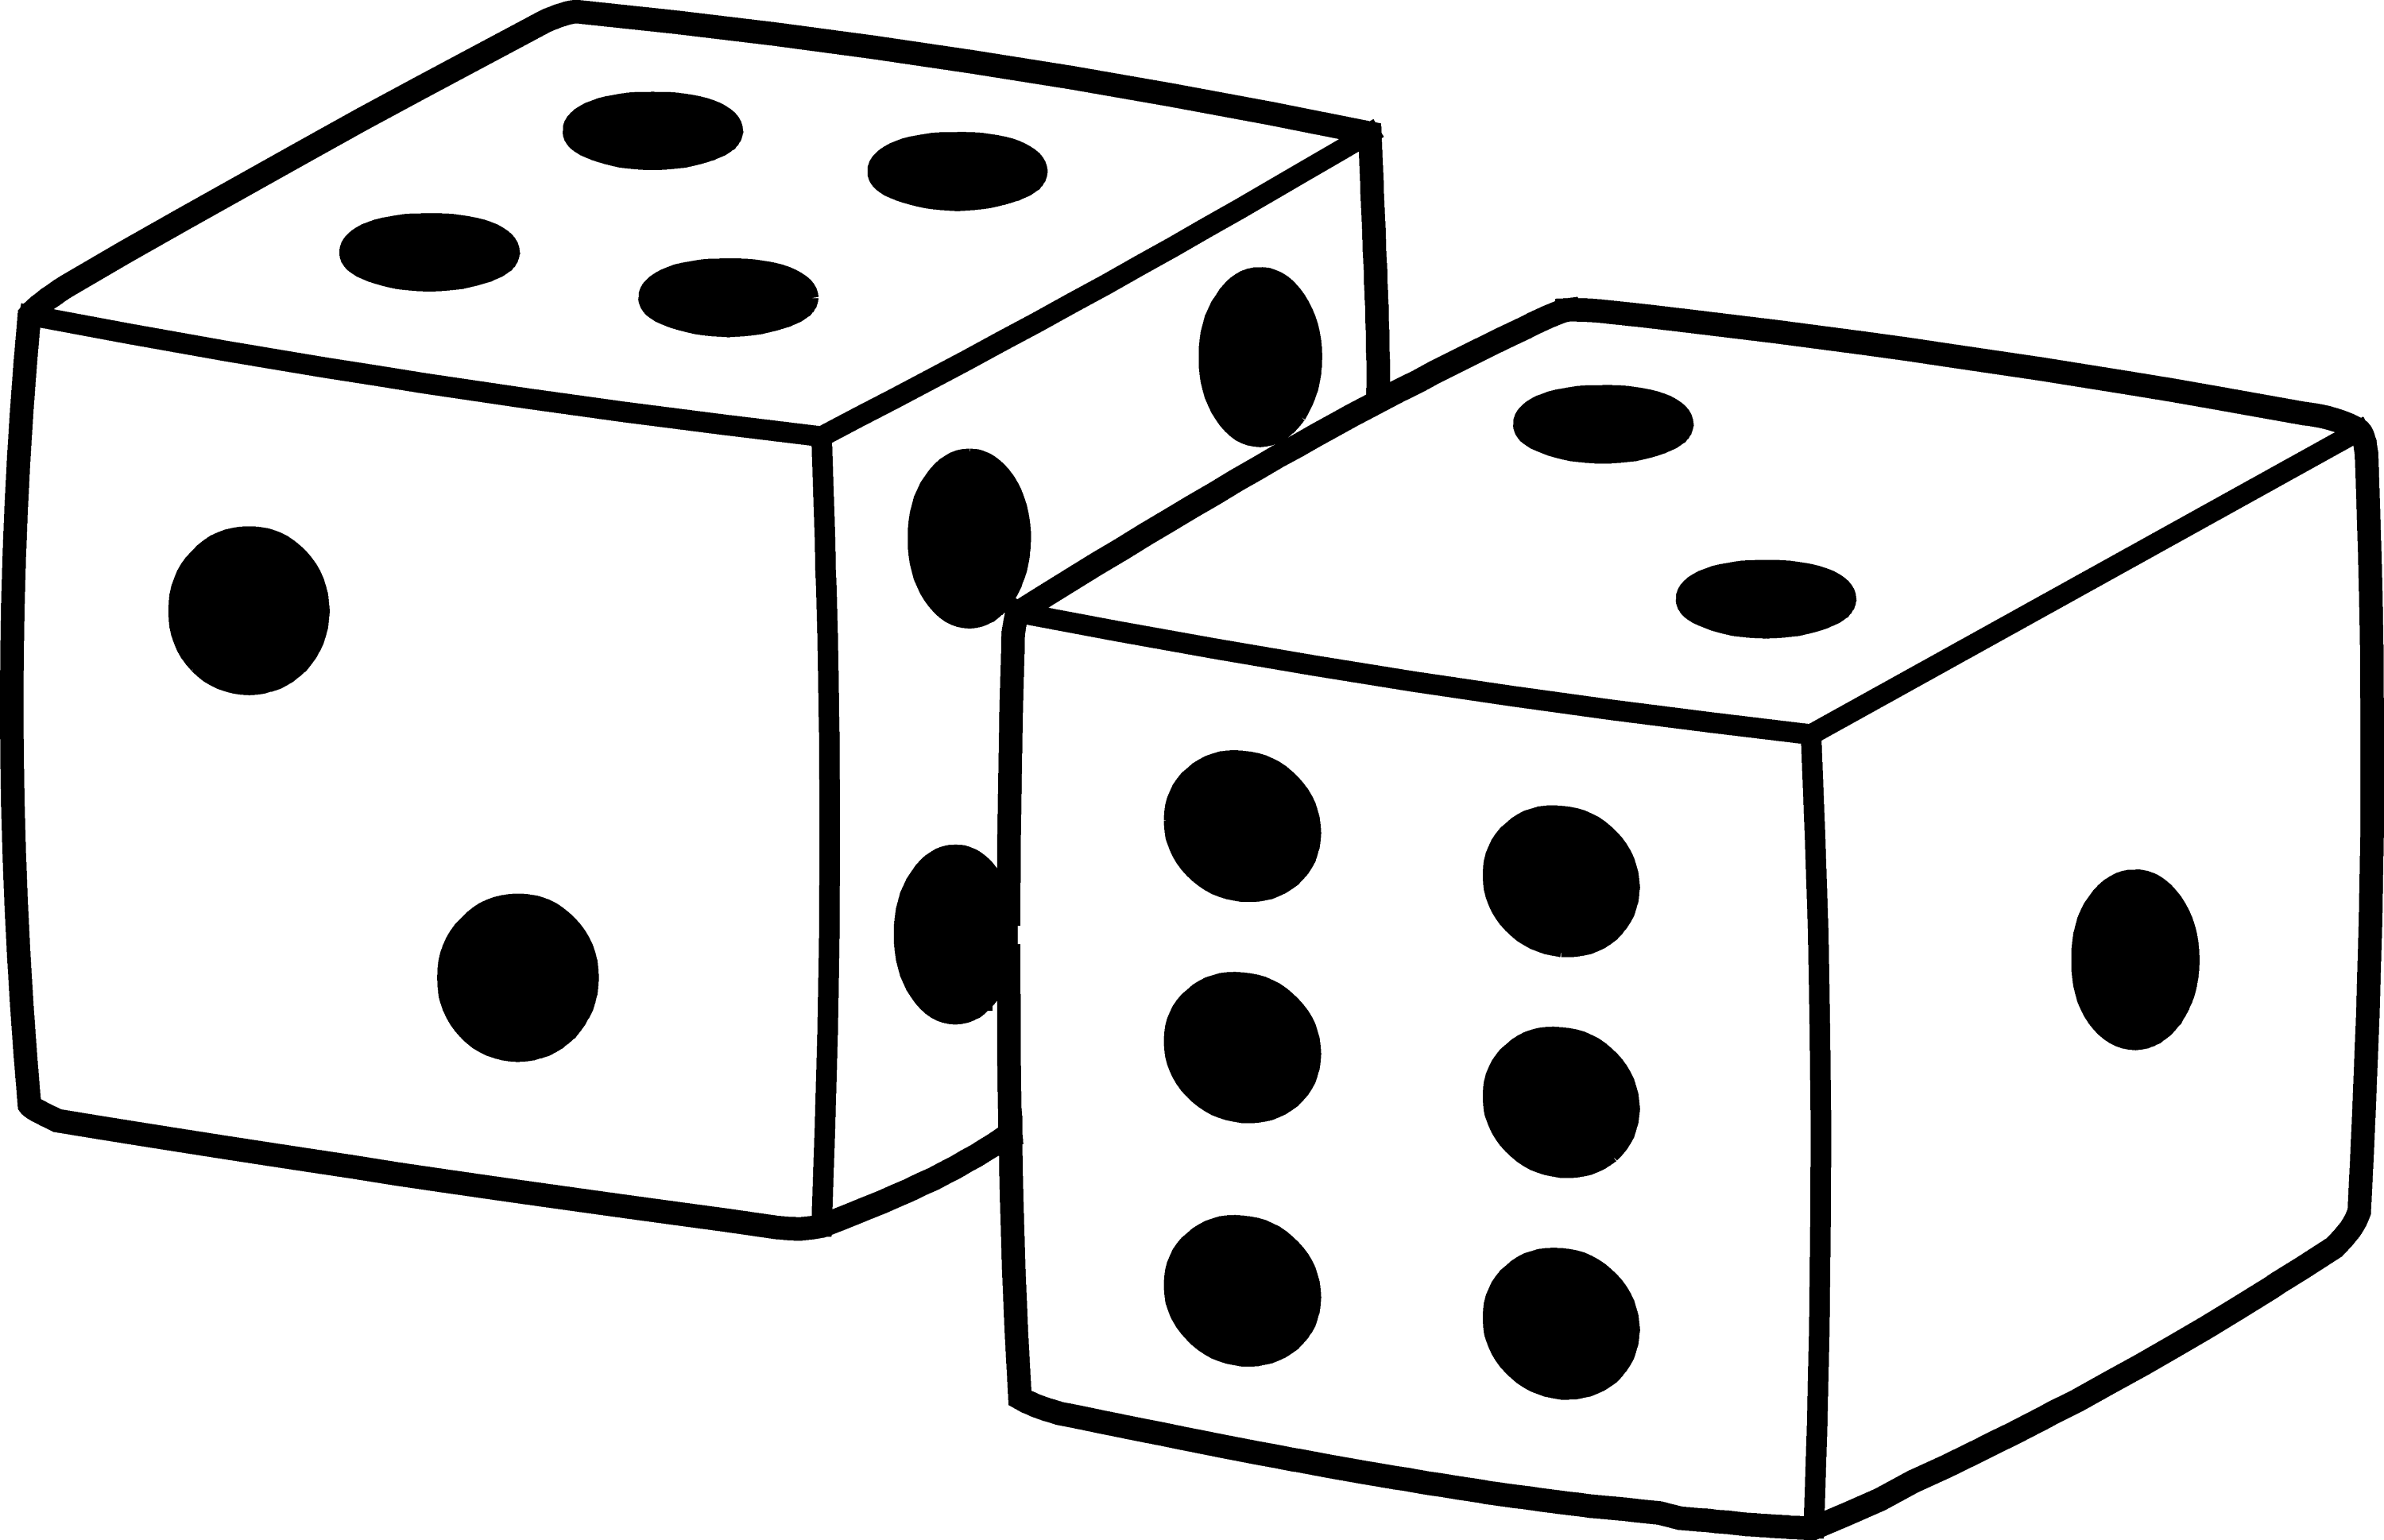 free clipart of dice - photo #33